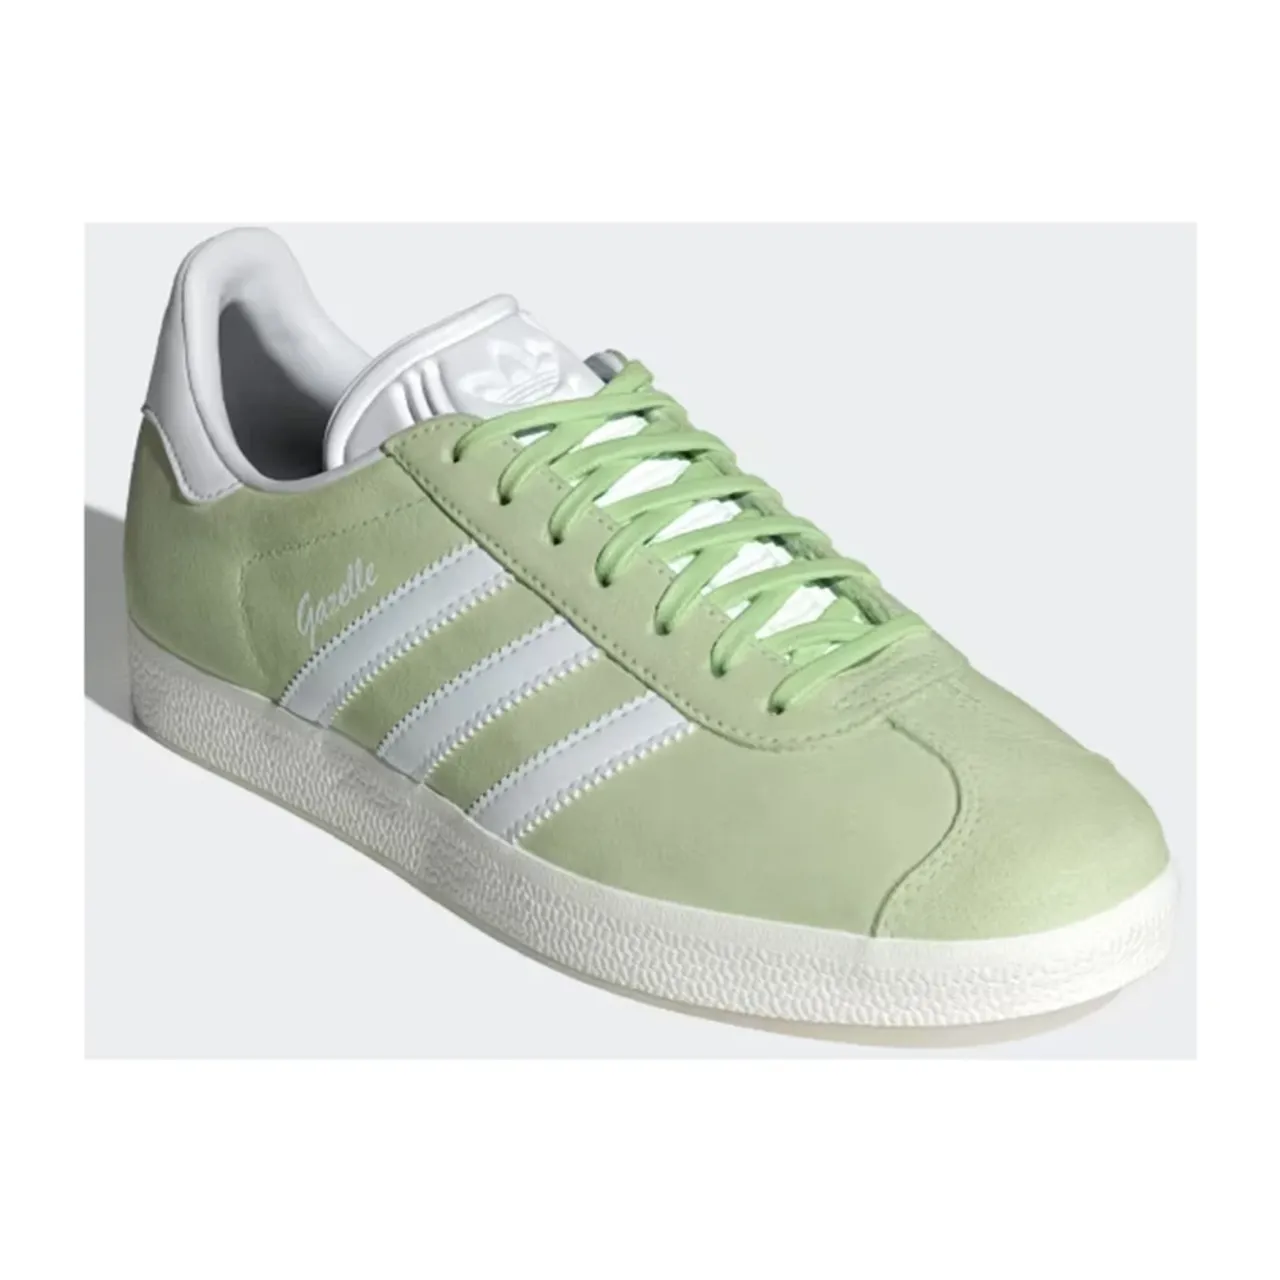 Adidas , Gazzelle Sneakers in Semi Green Spark ,Green male, Sizes: